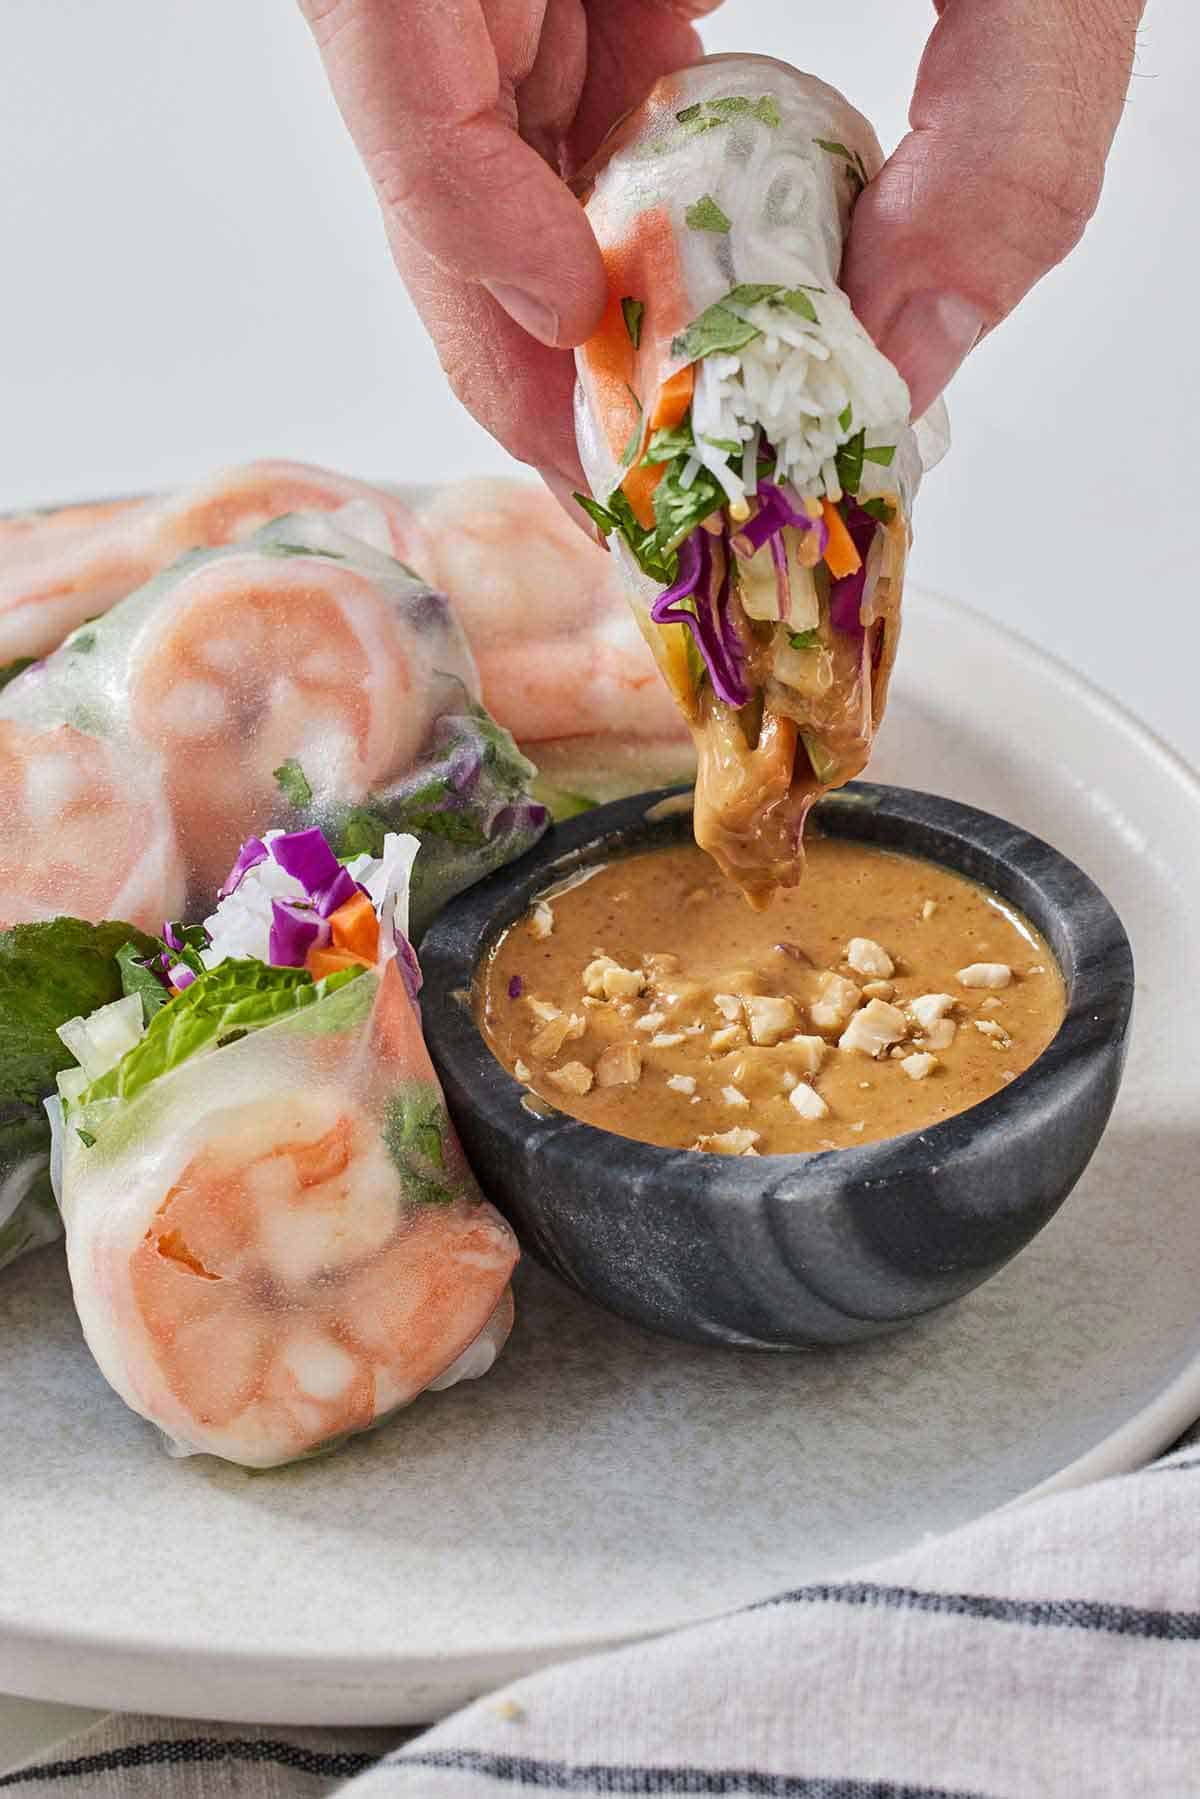 Half of a salad roll dipped into a peanut sauce.